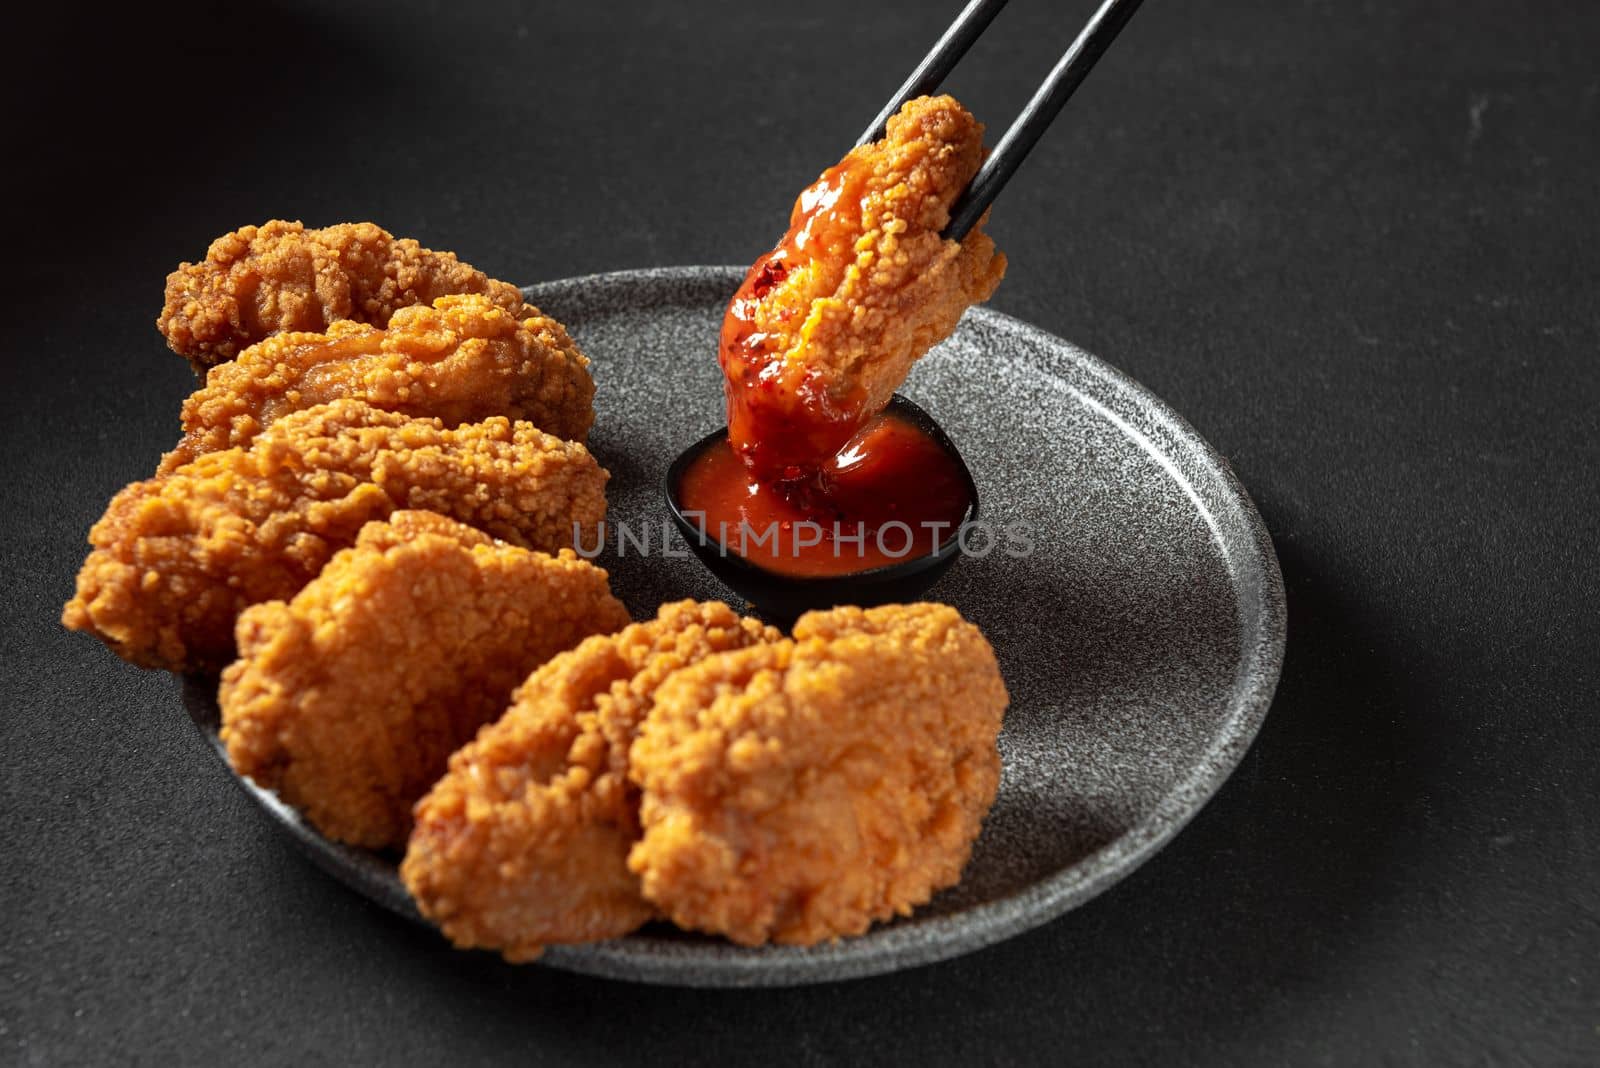 Spicy pieces of chicken fillet in crispy breading, on a black plate on a dark background, stone or concrete. Top view with a copying spot. by gulyaevstudio